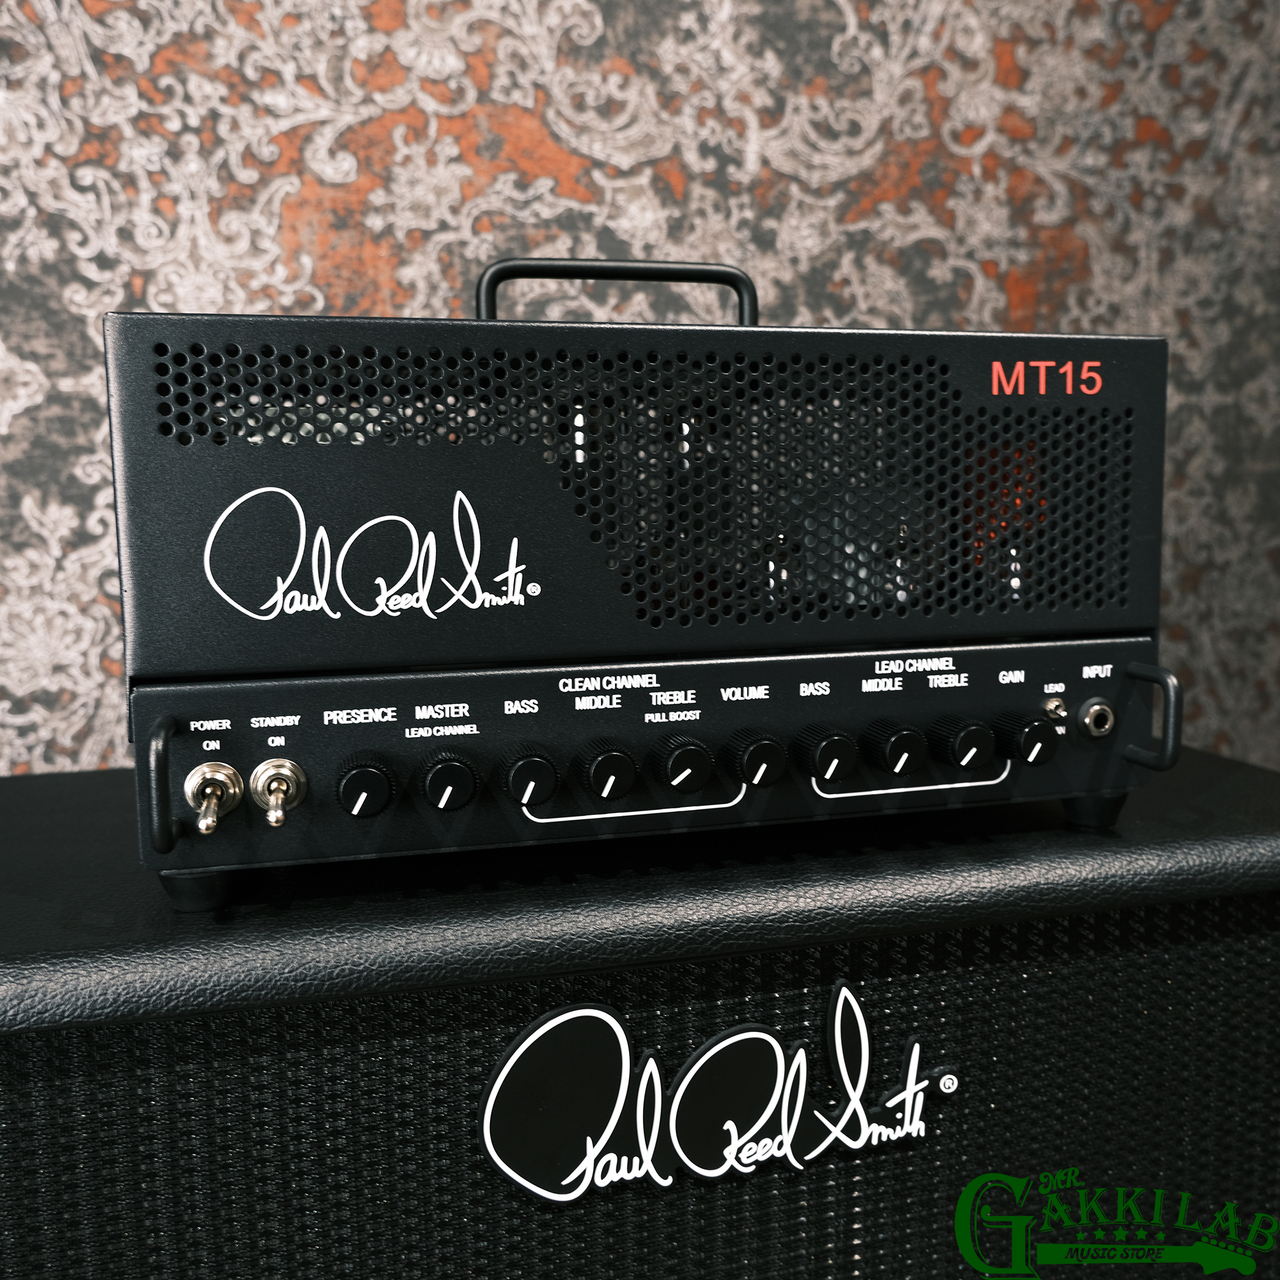 Paul Reed Smith(PRS) MT15 / Mark Tremonti Signature Amplifier ...